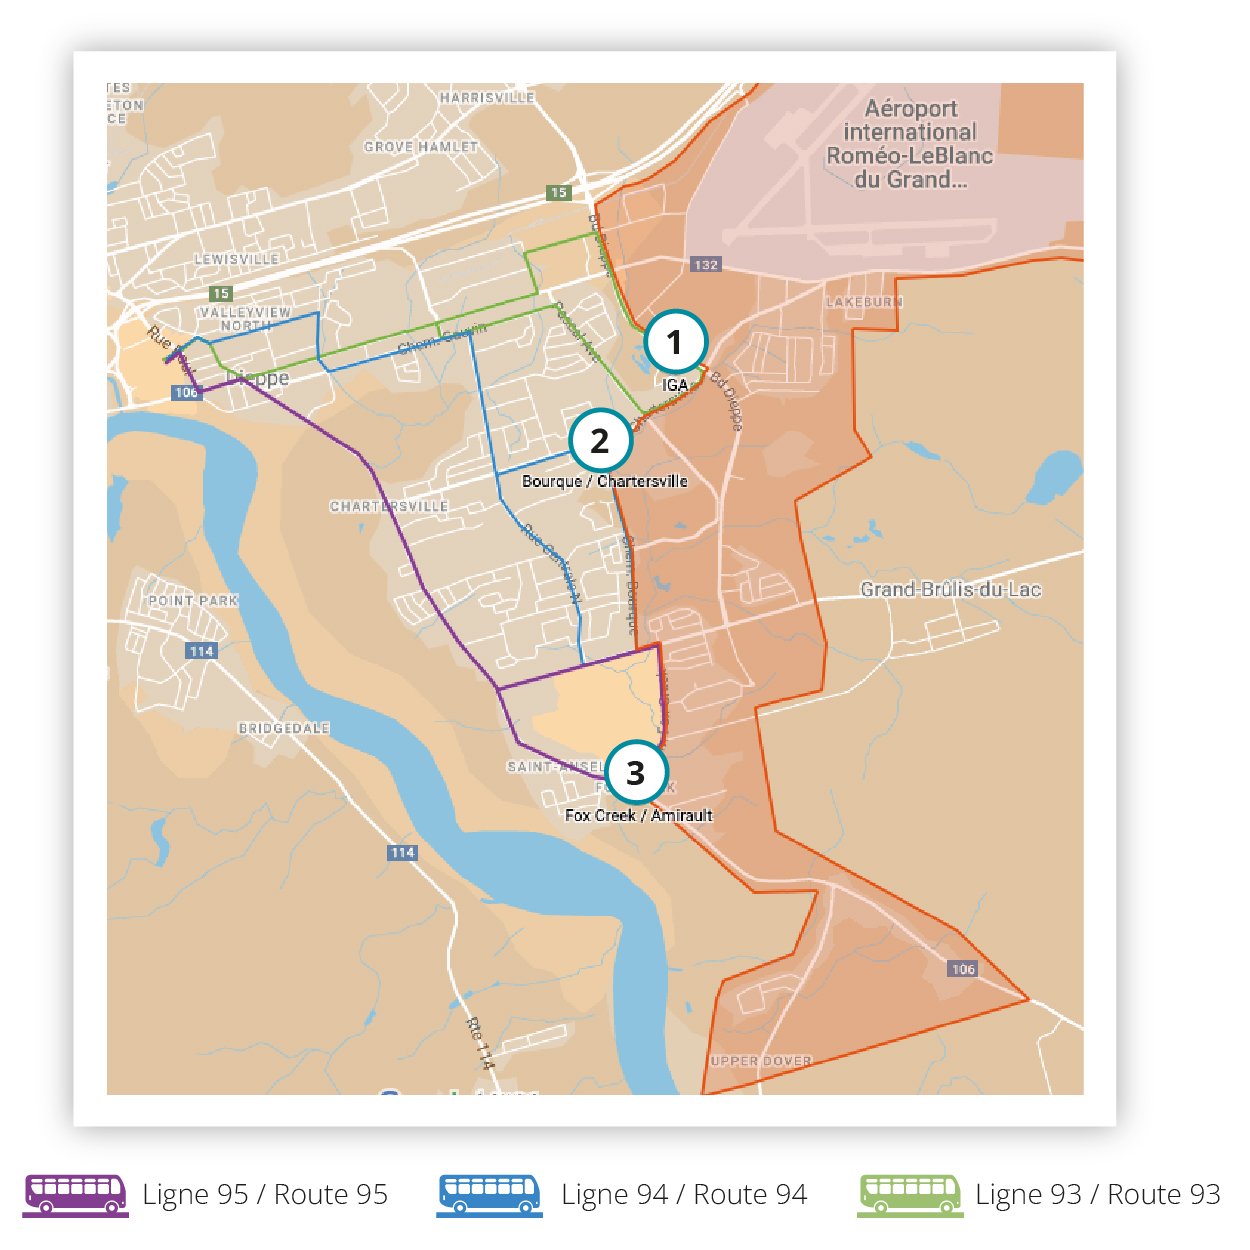 Map showing the new transfer points for on-demand transit